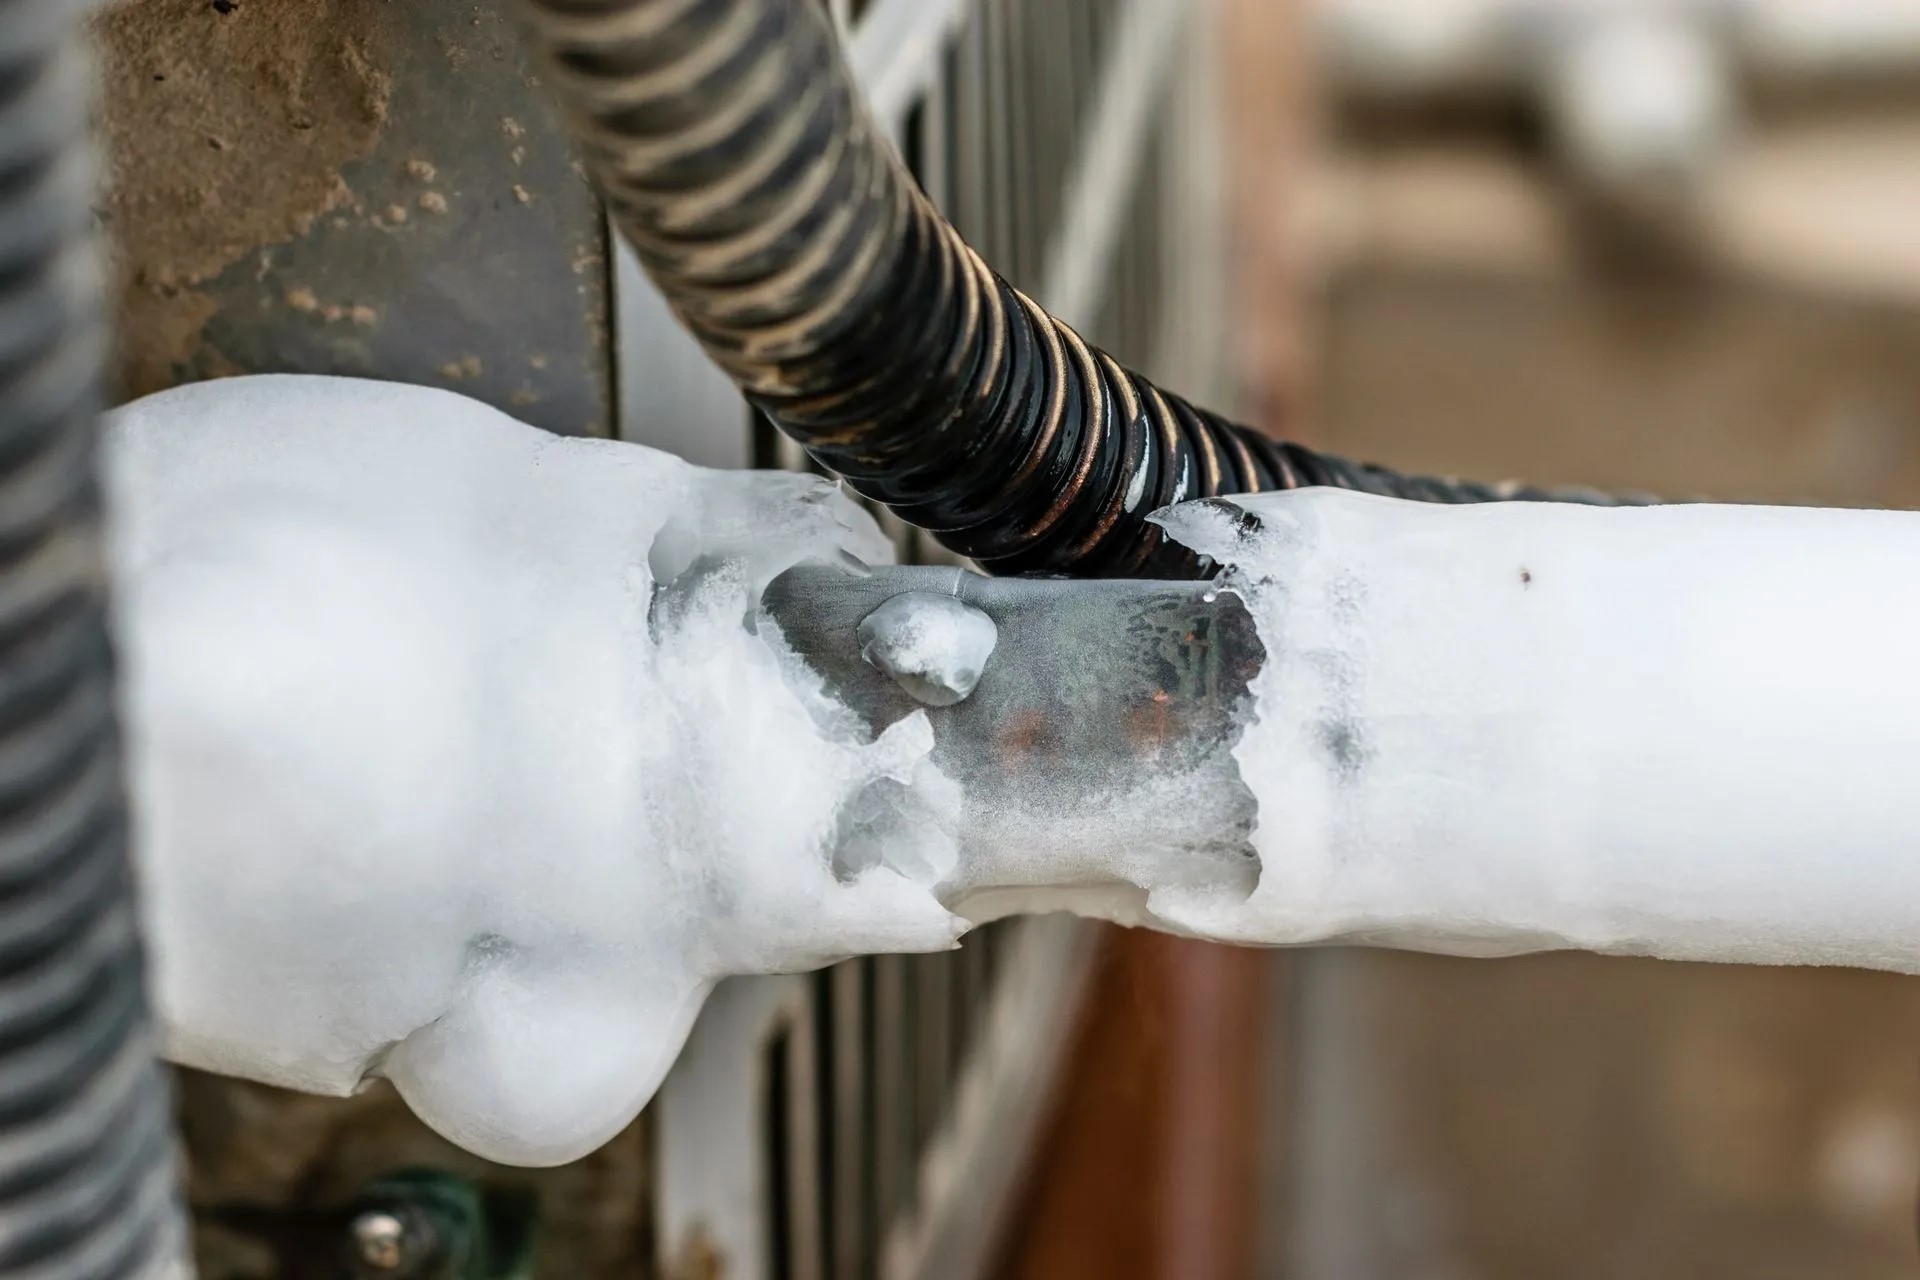 At What Outdoor Temperature Will Pipes Freeze